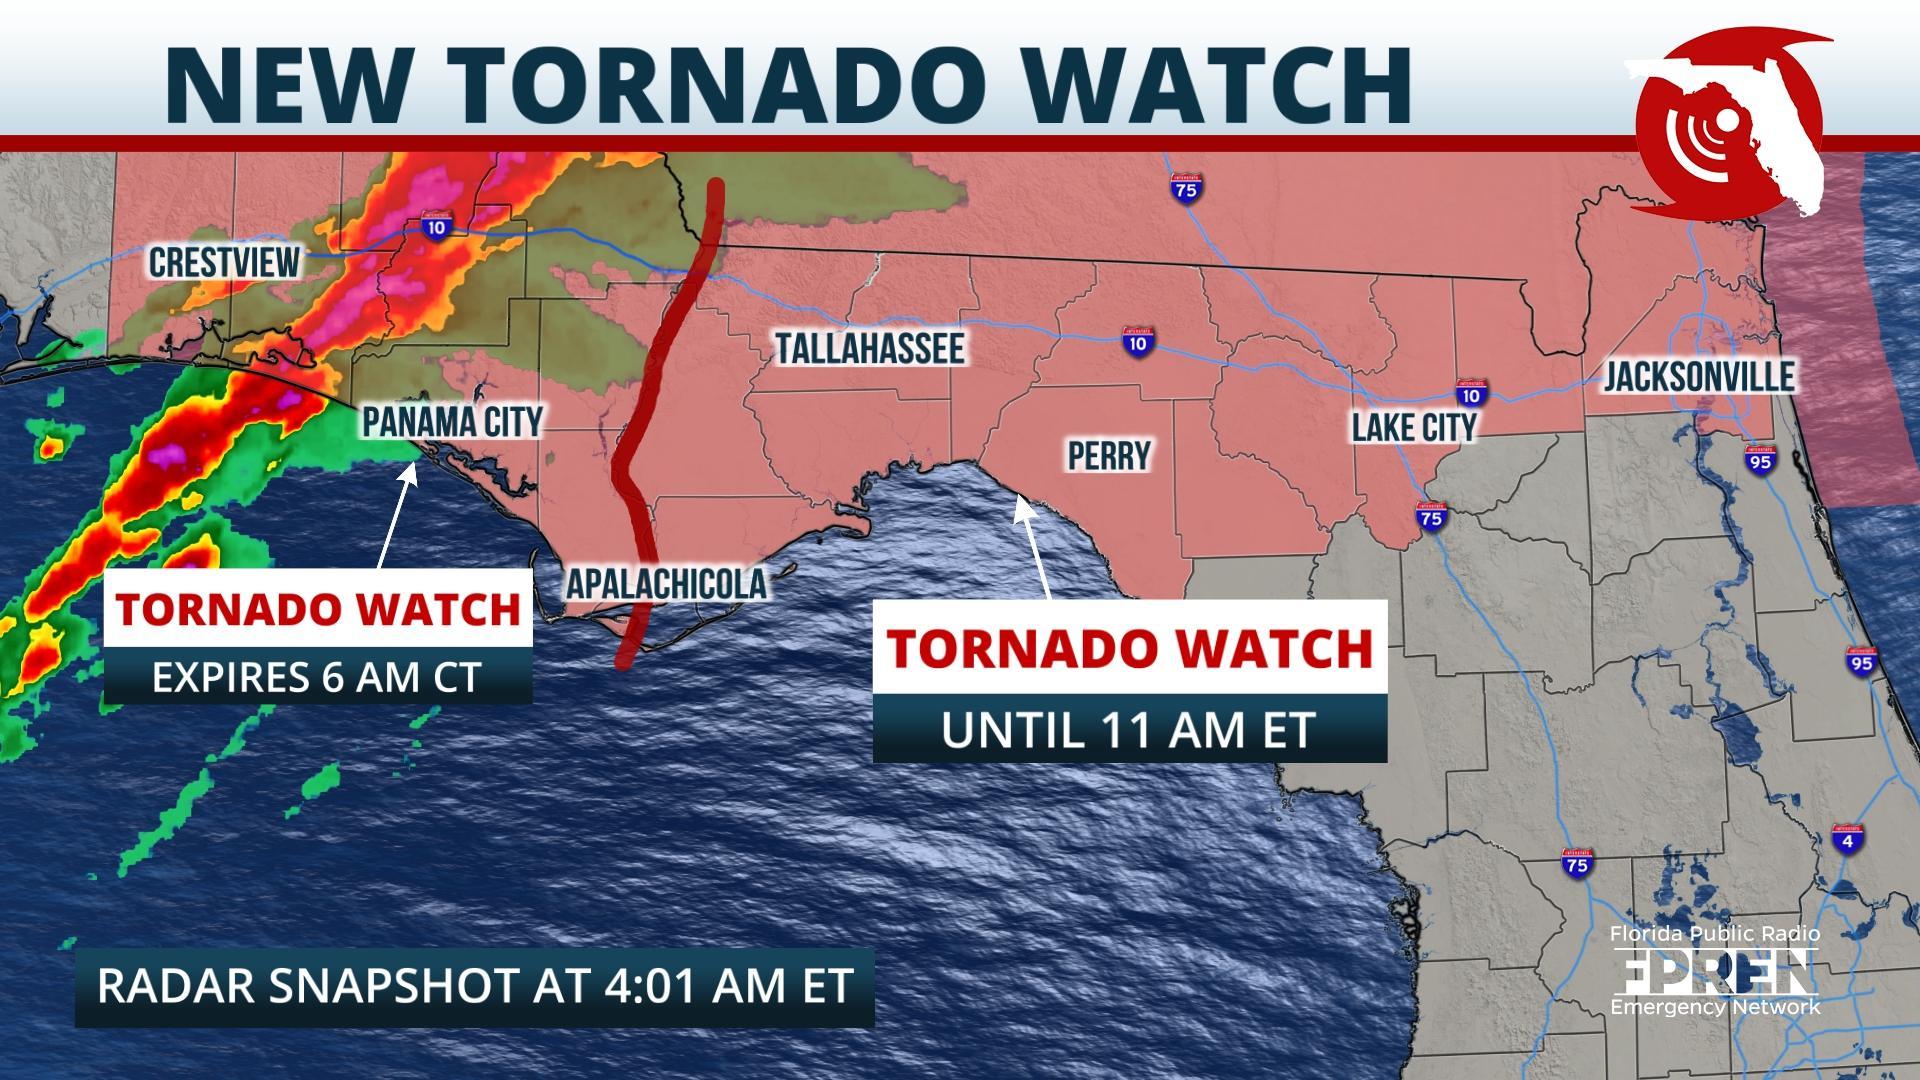 Tornado Watch Now Includes Tallahassee, Lake City and Jacksonville